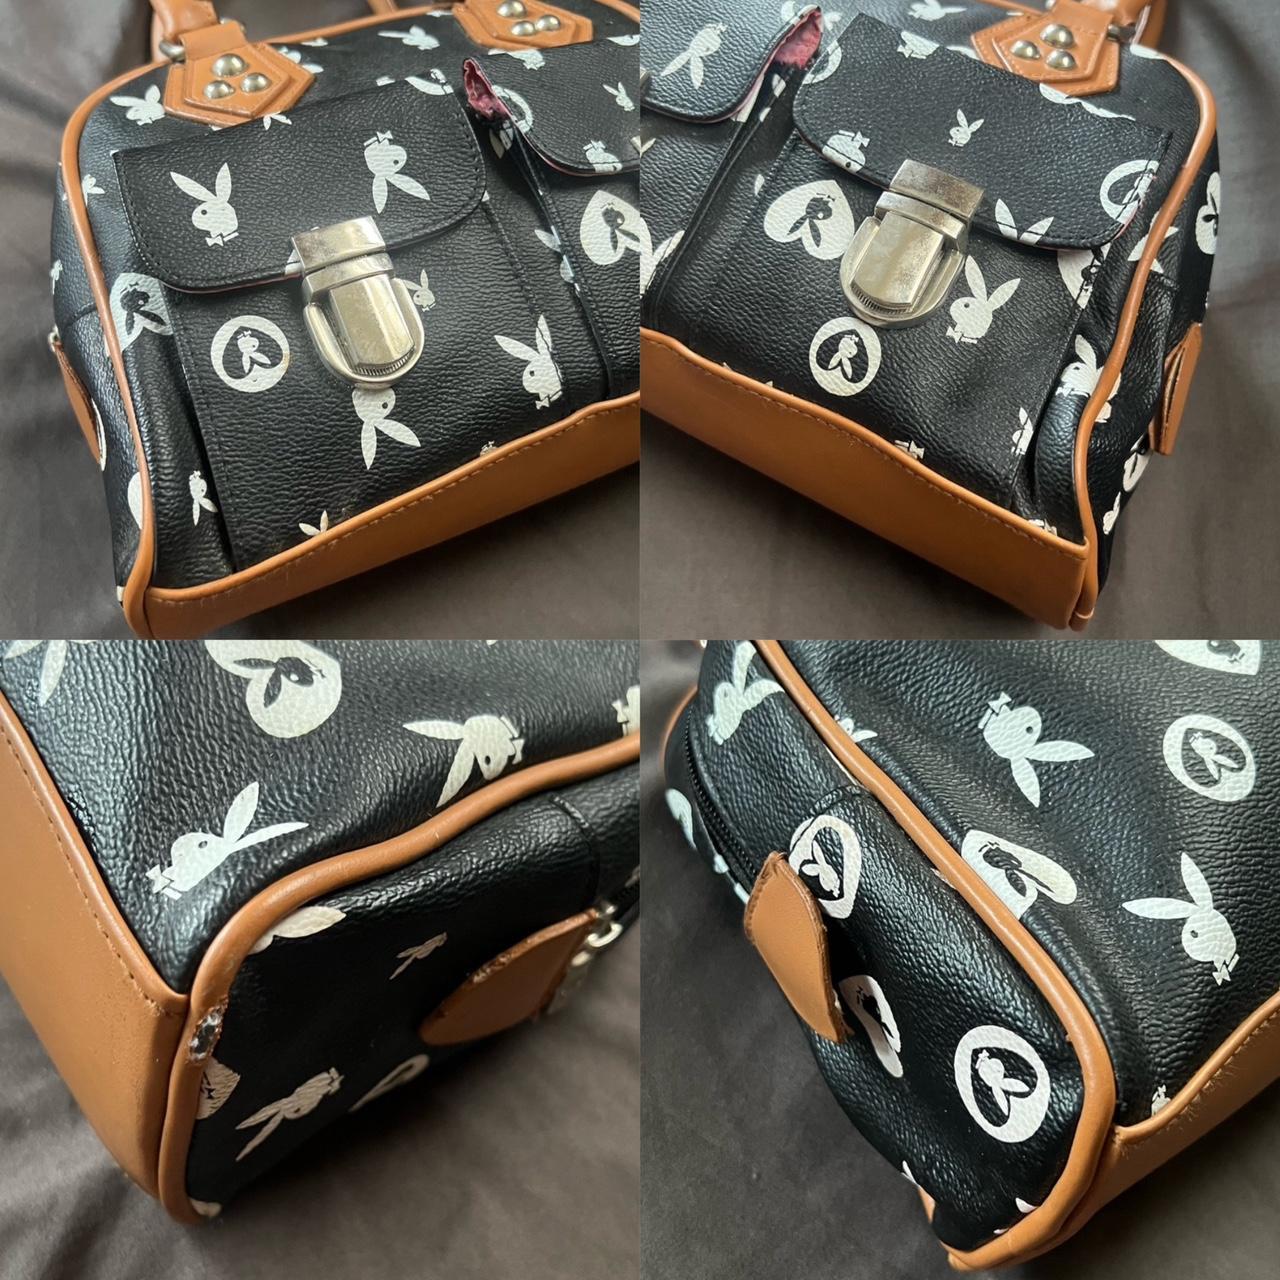 Playboy monogram black & white bag New without tags - Depop